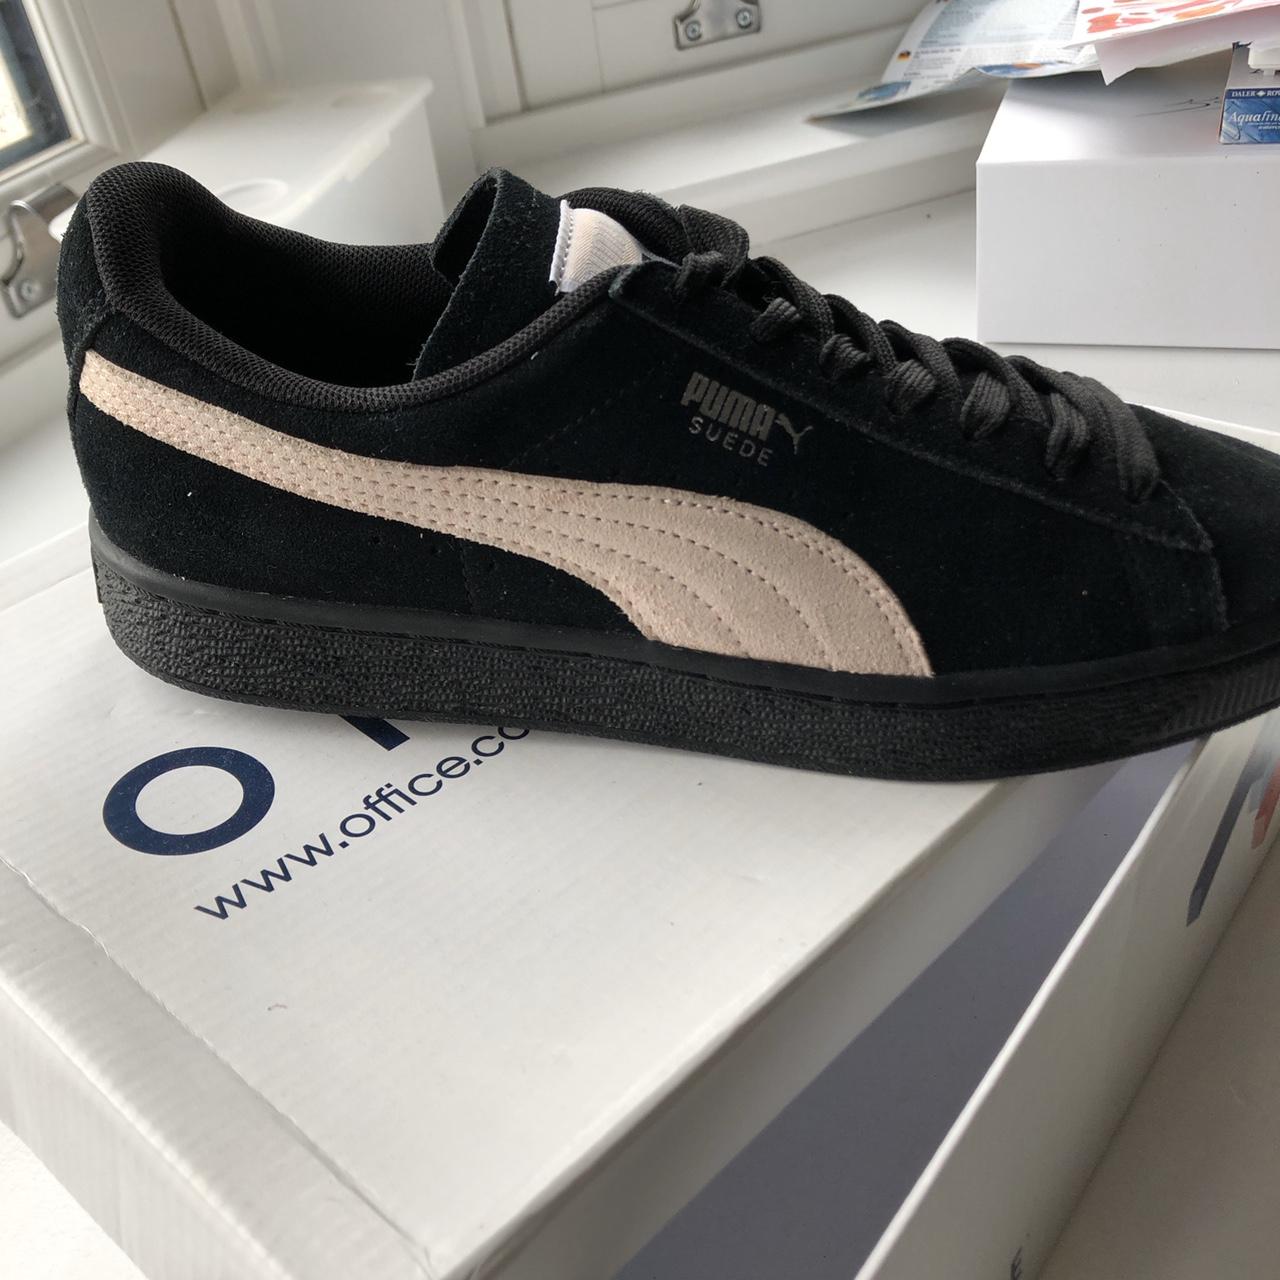 👟Black and Pink Puma Suede Trainers with black sole👟... - Depop